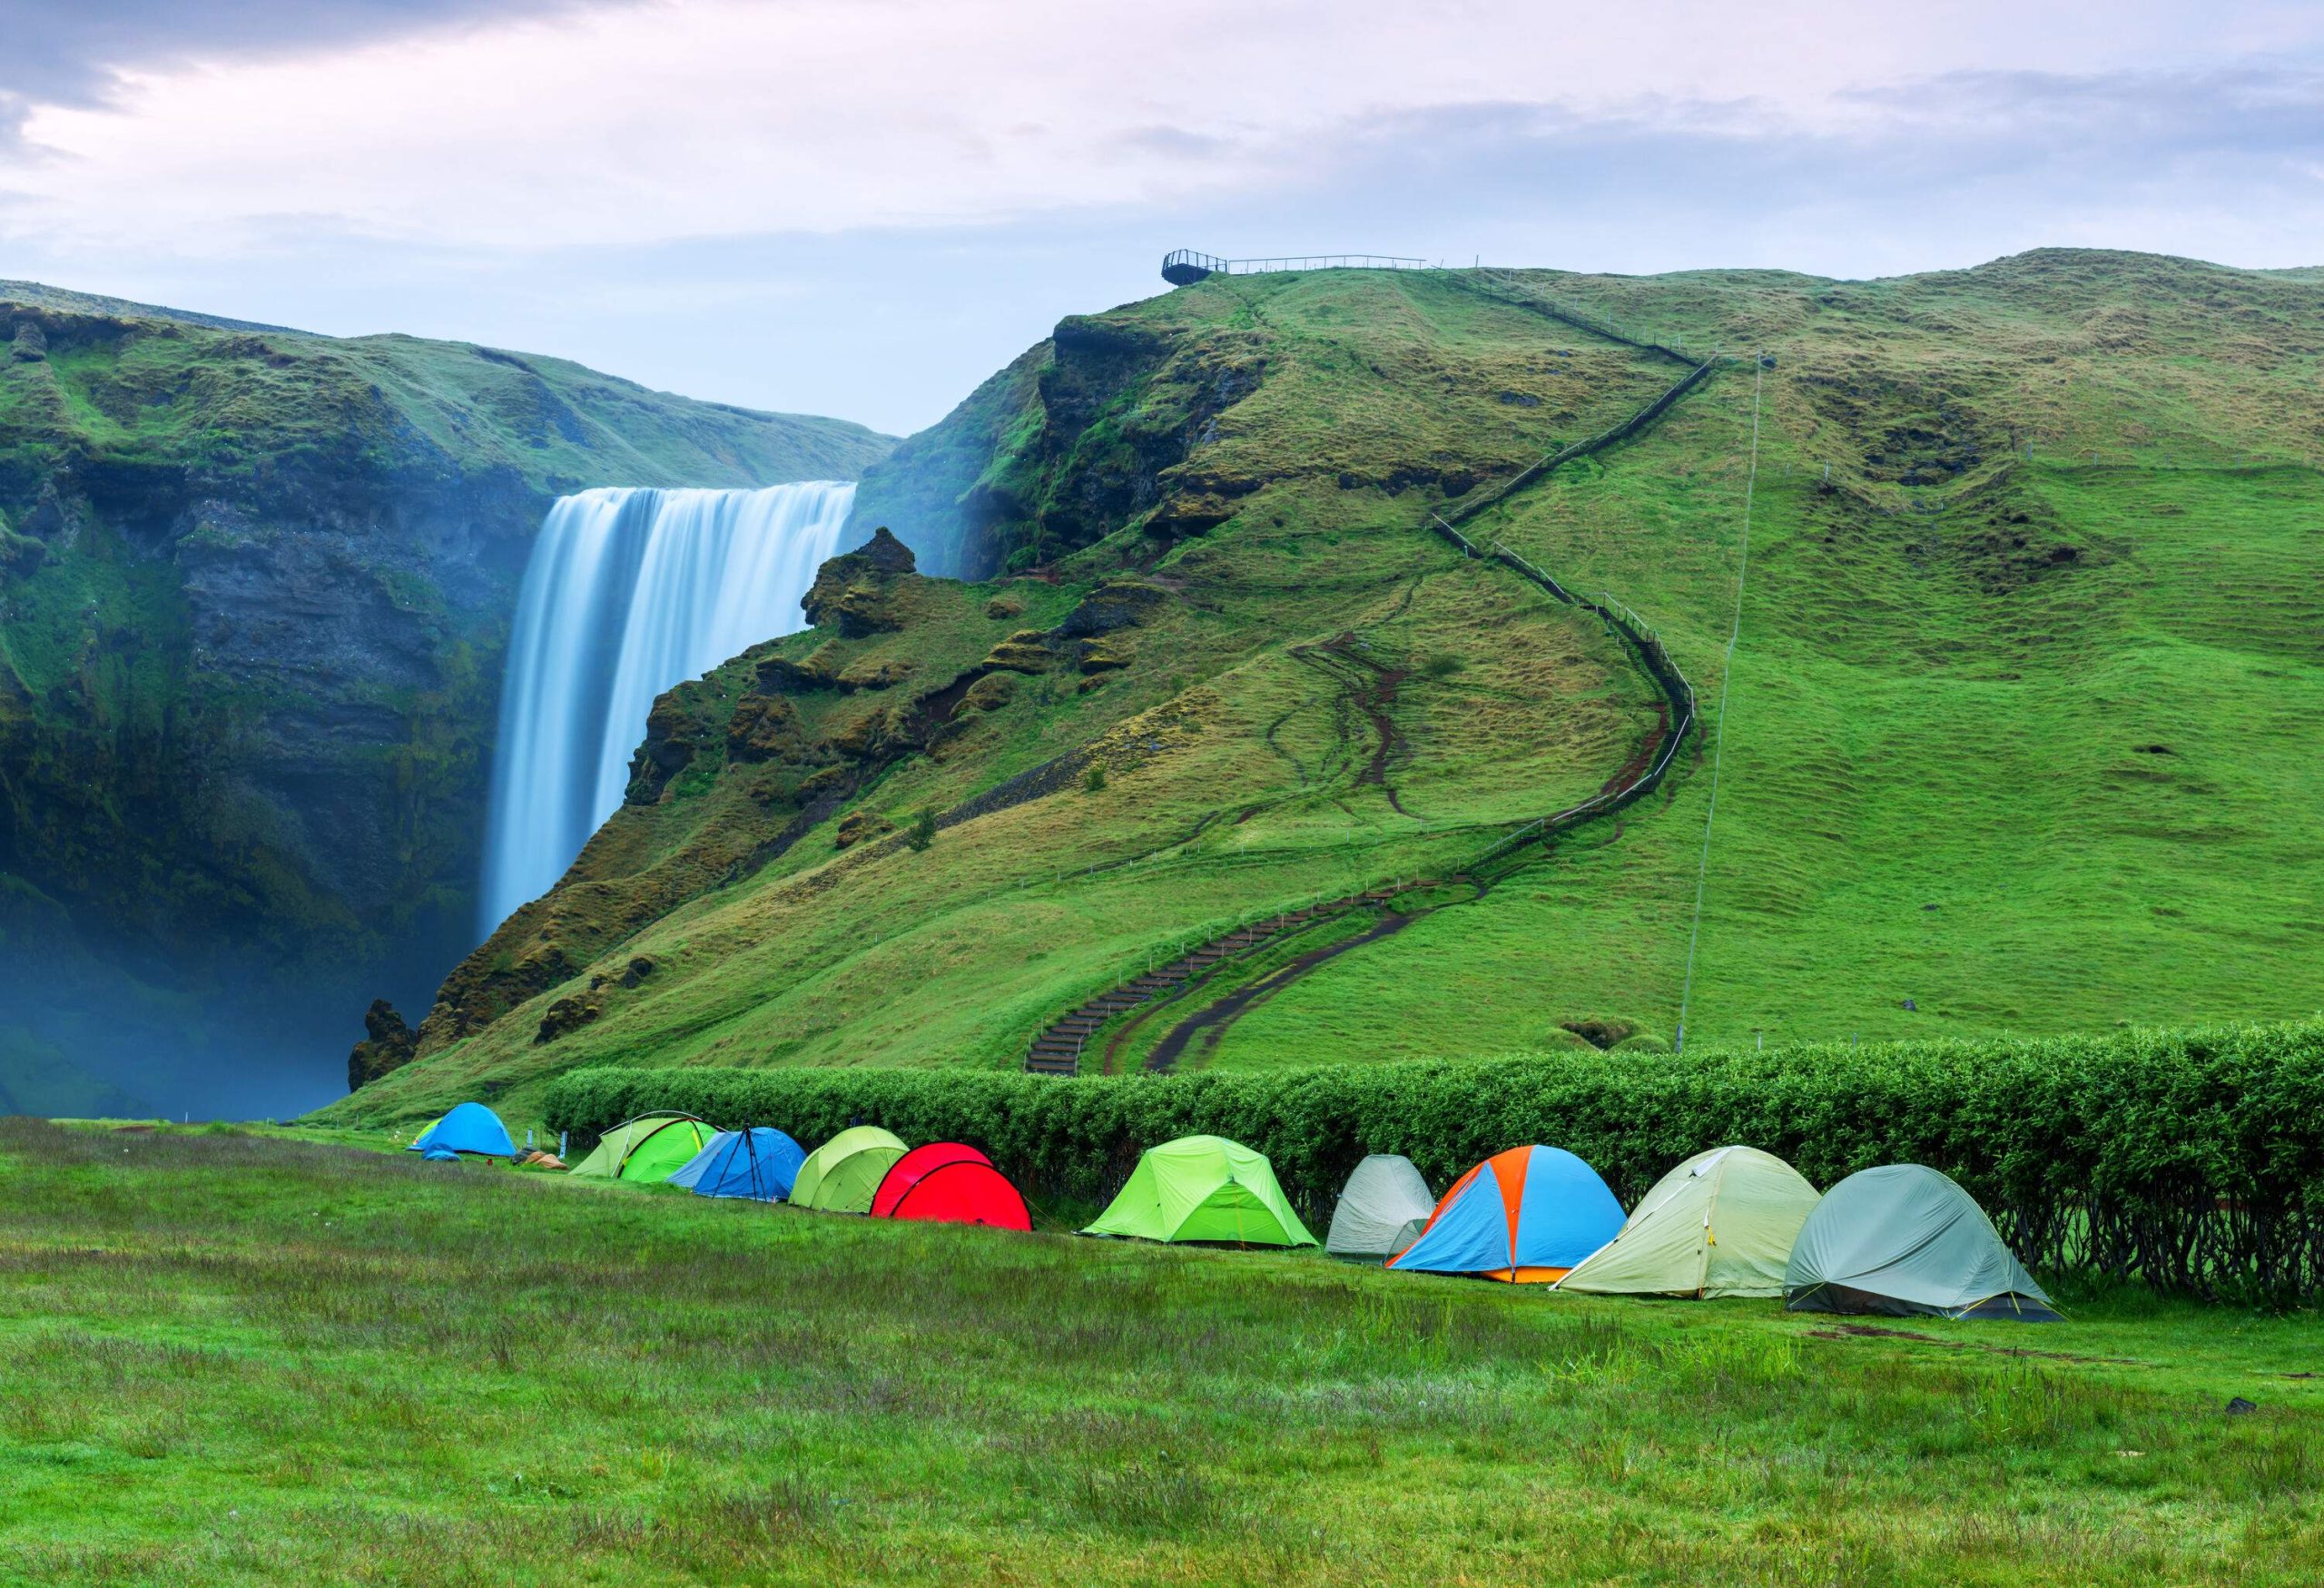 Amidst the lush green surroundings and ascending slope terrain, a picturesque row of colourful camping tents is set up near the iconic Skogafoss waterfall.